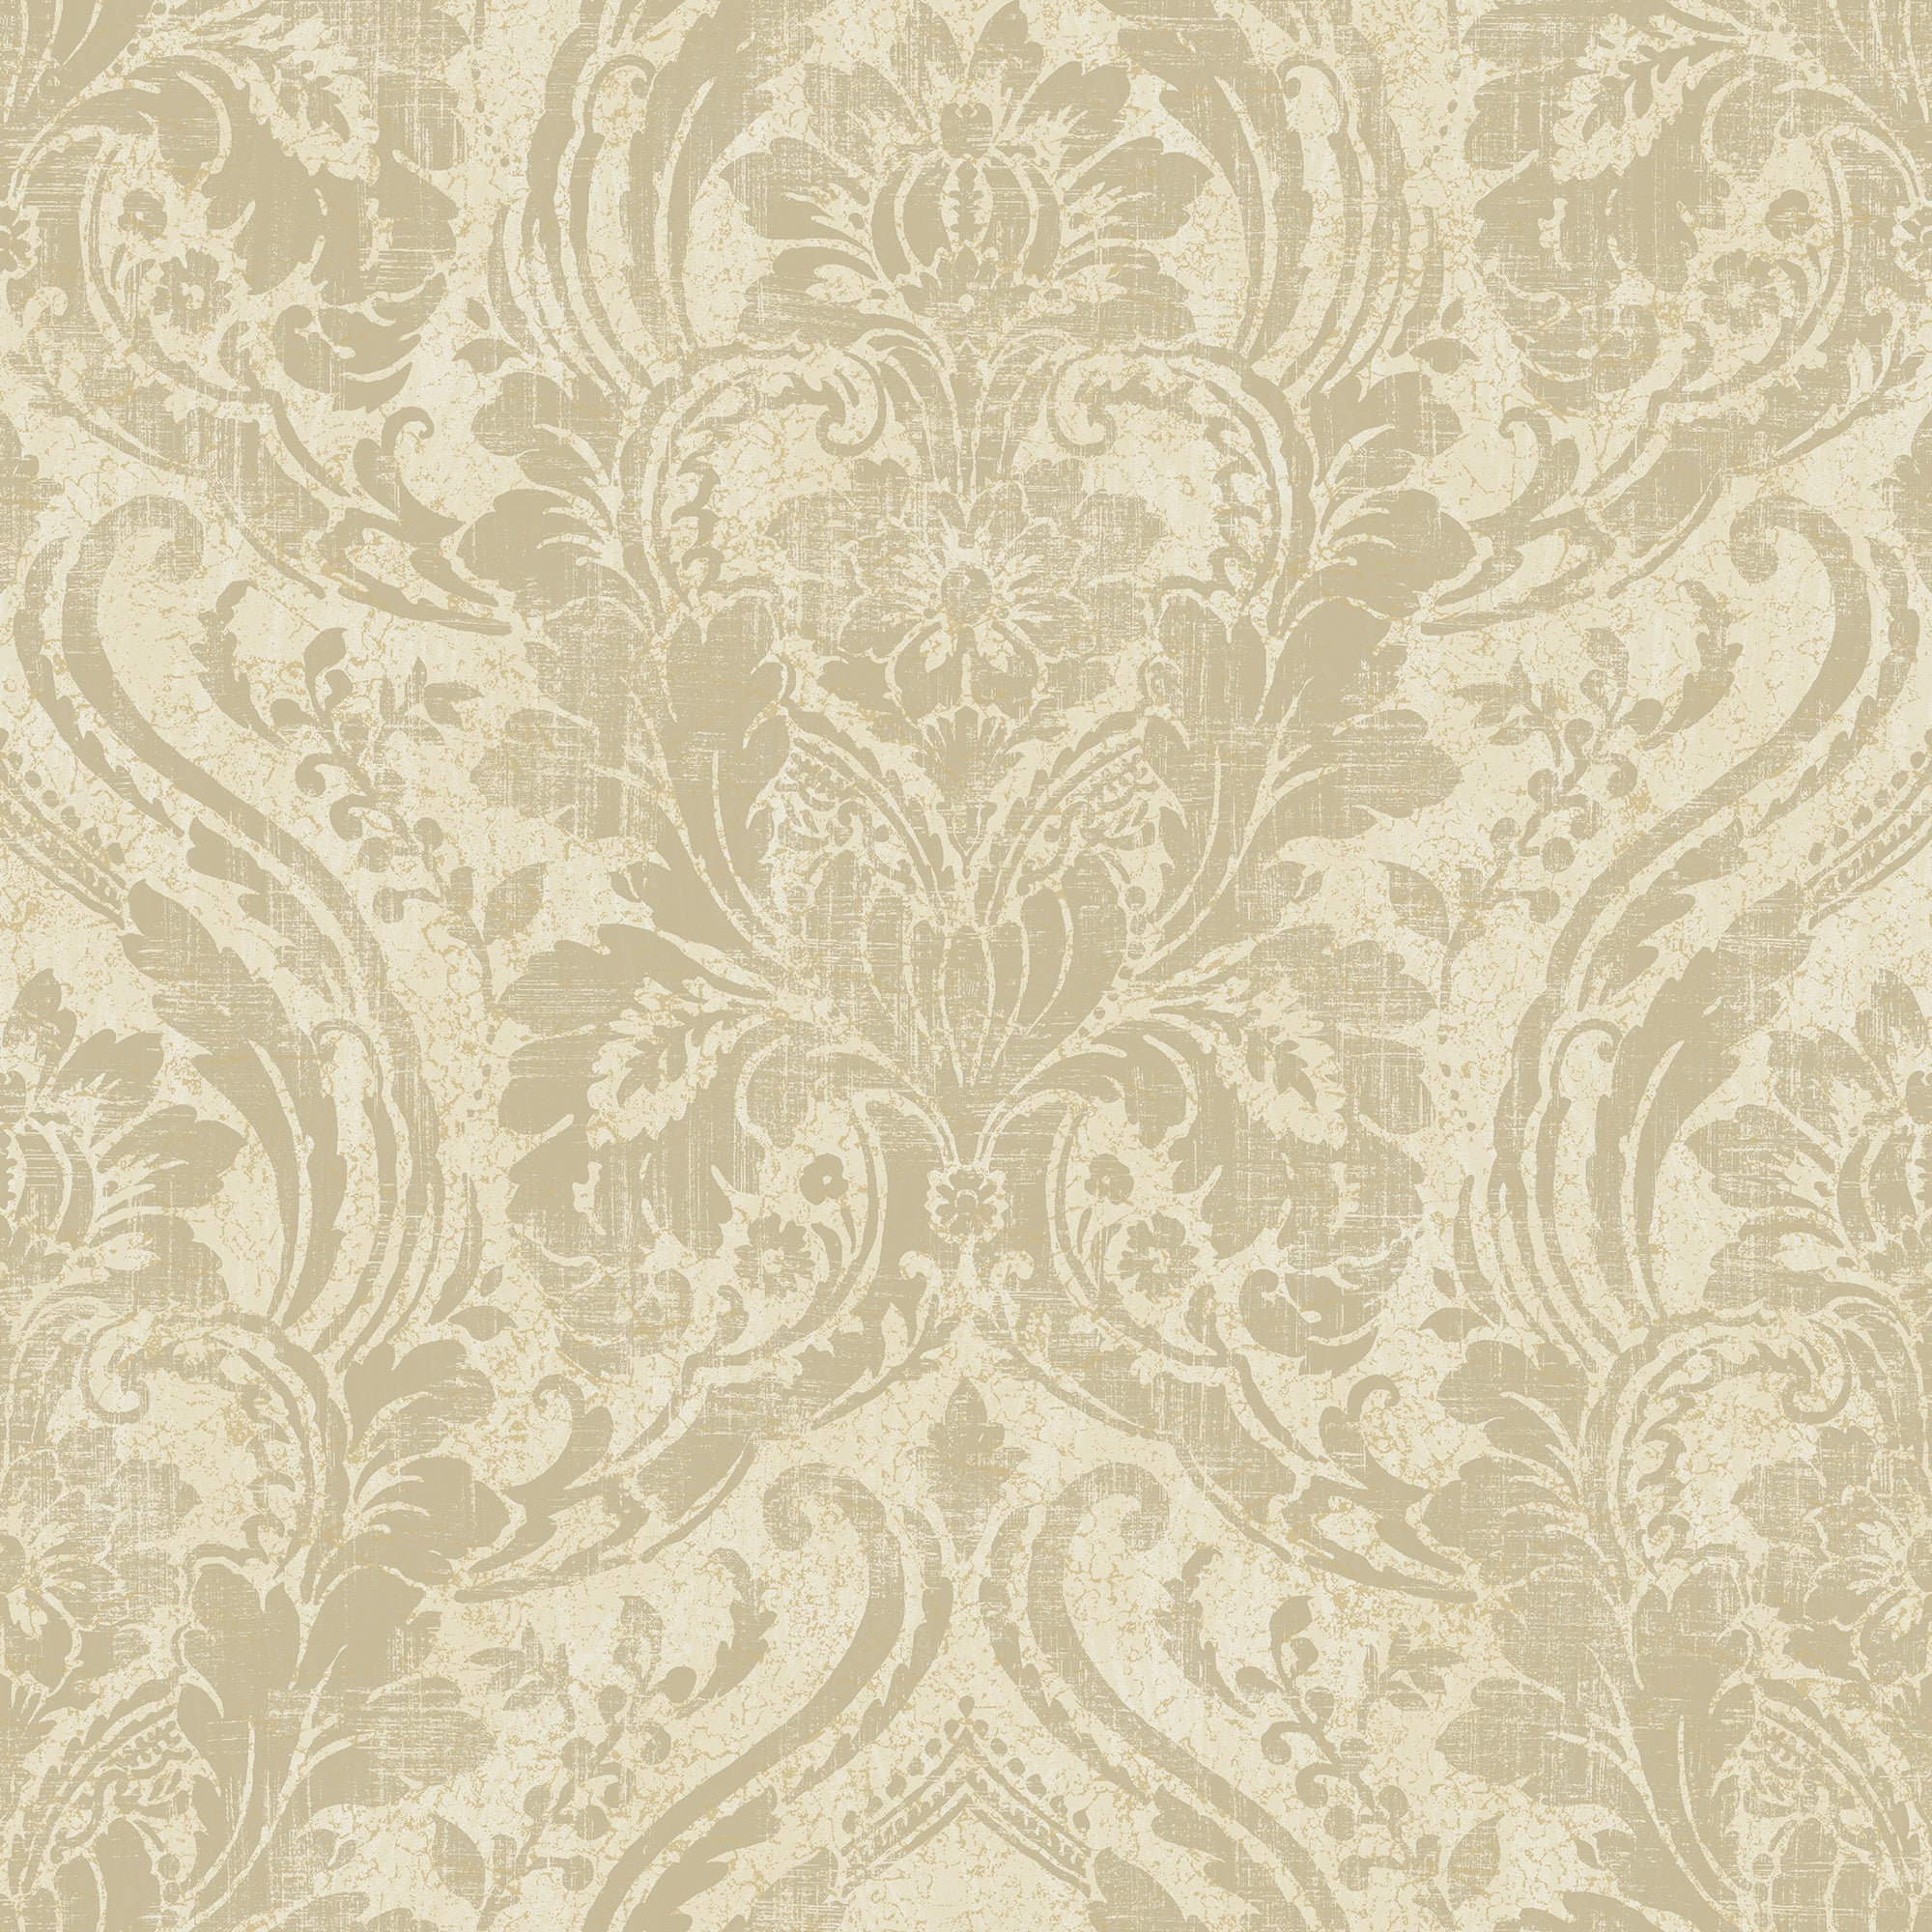 Textured Damask Cream and Gold Wallpaper | Grandeco | A68703